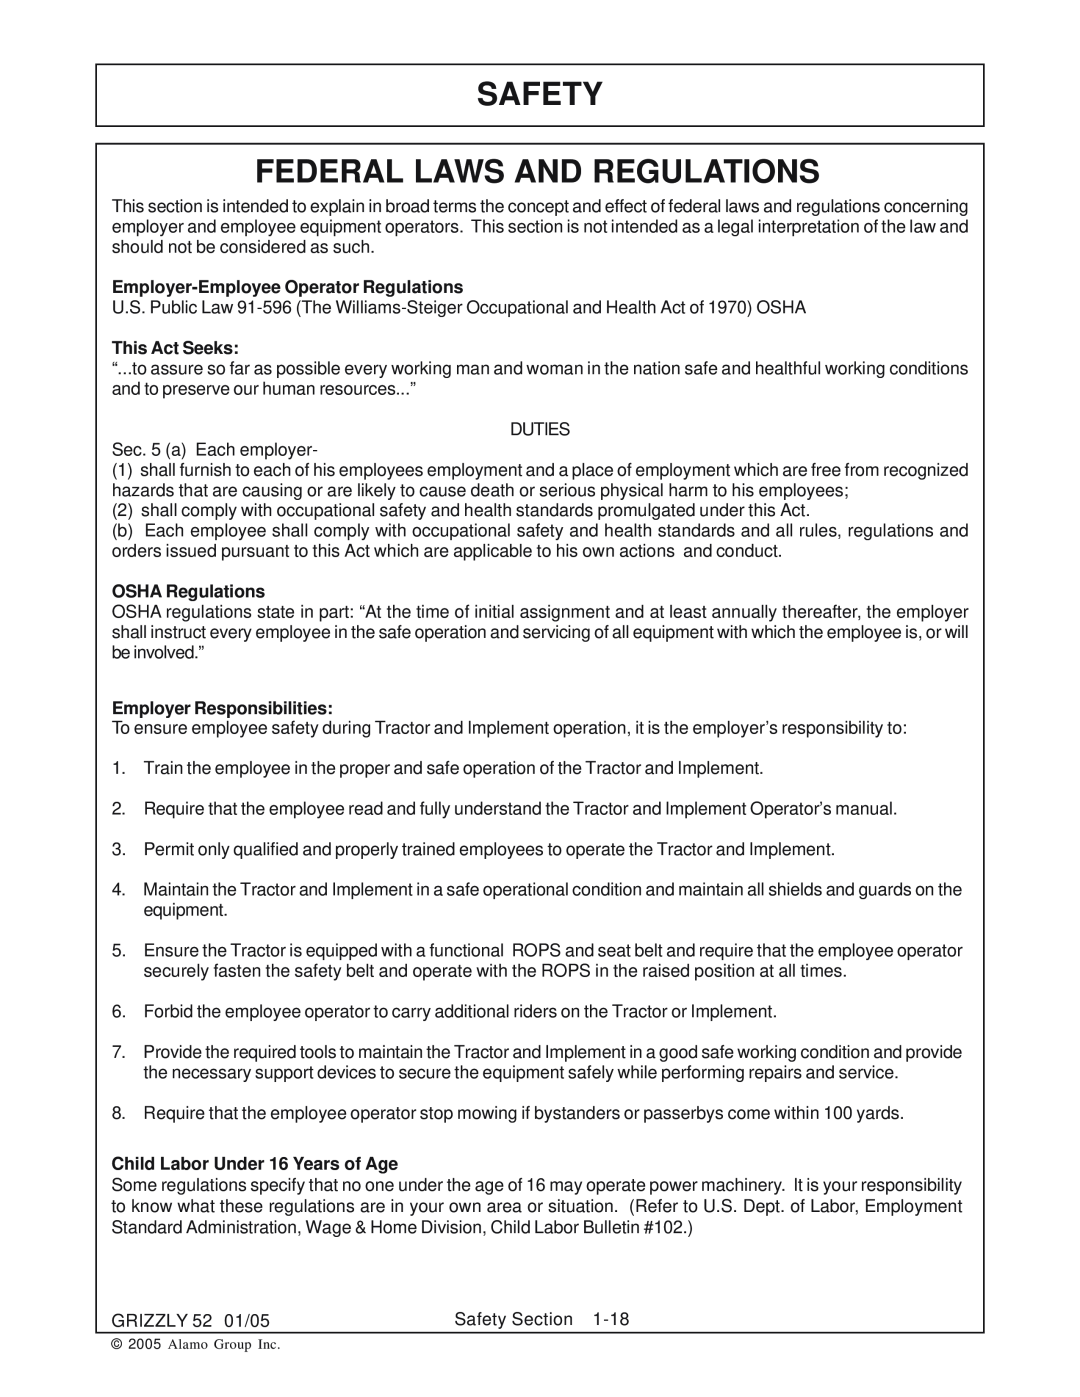 Grizzly 52 Safety Federal Laws And Regulations, Employer-Employee Operator Regulations, This Act Seeks, OSHA Regulations 